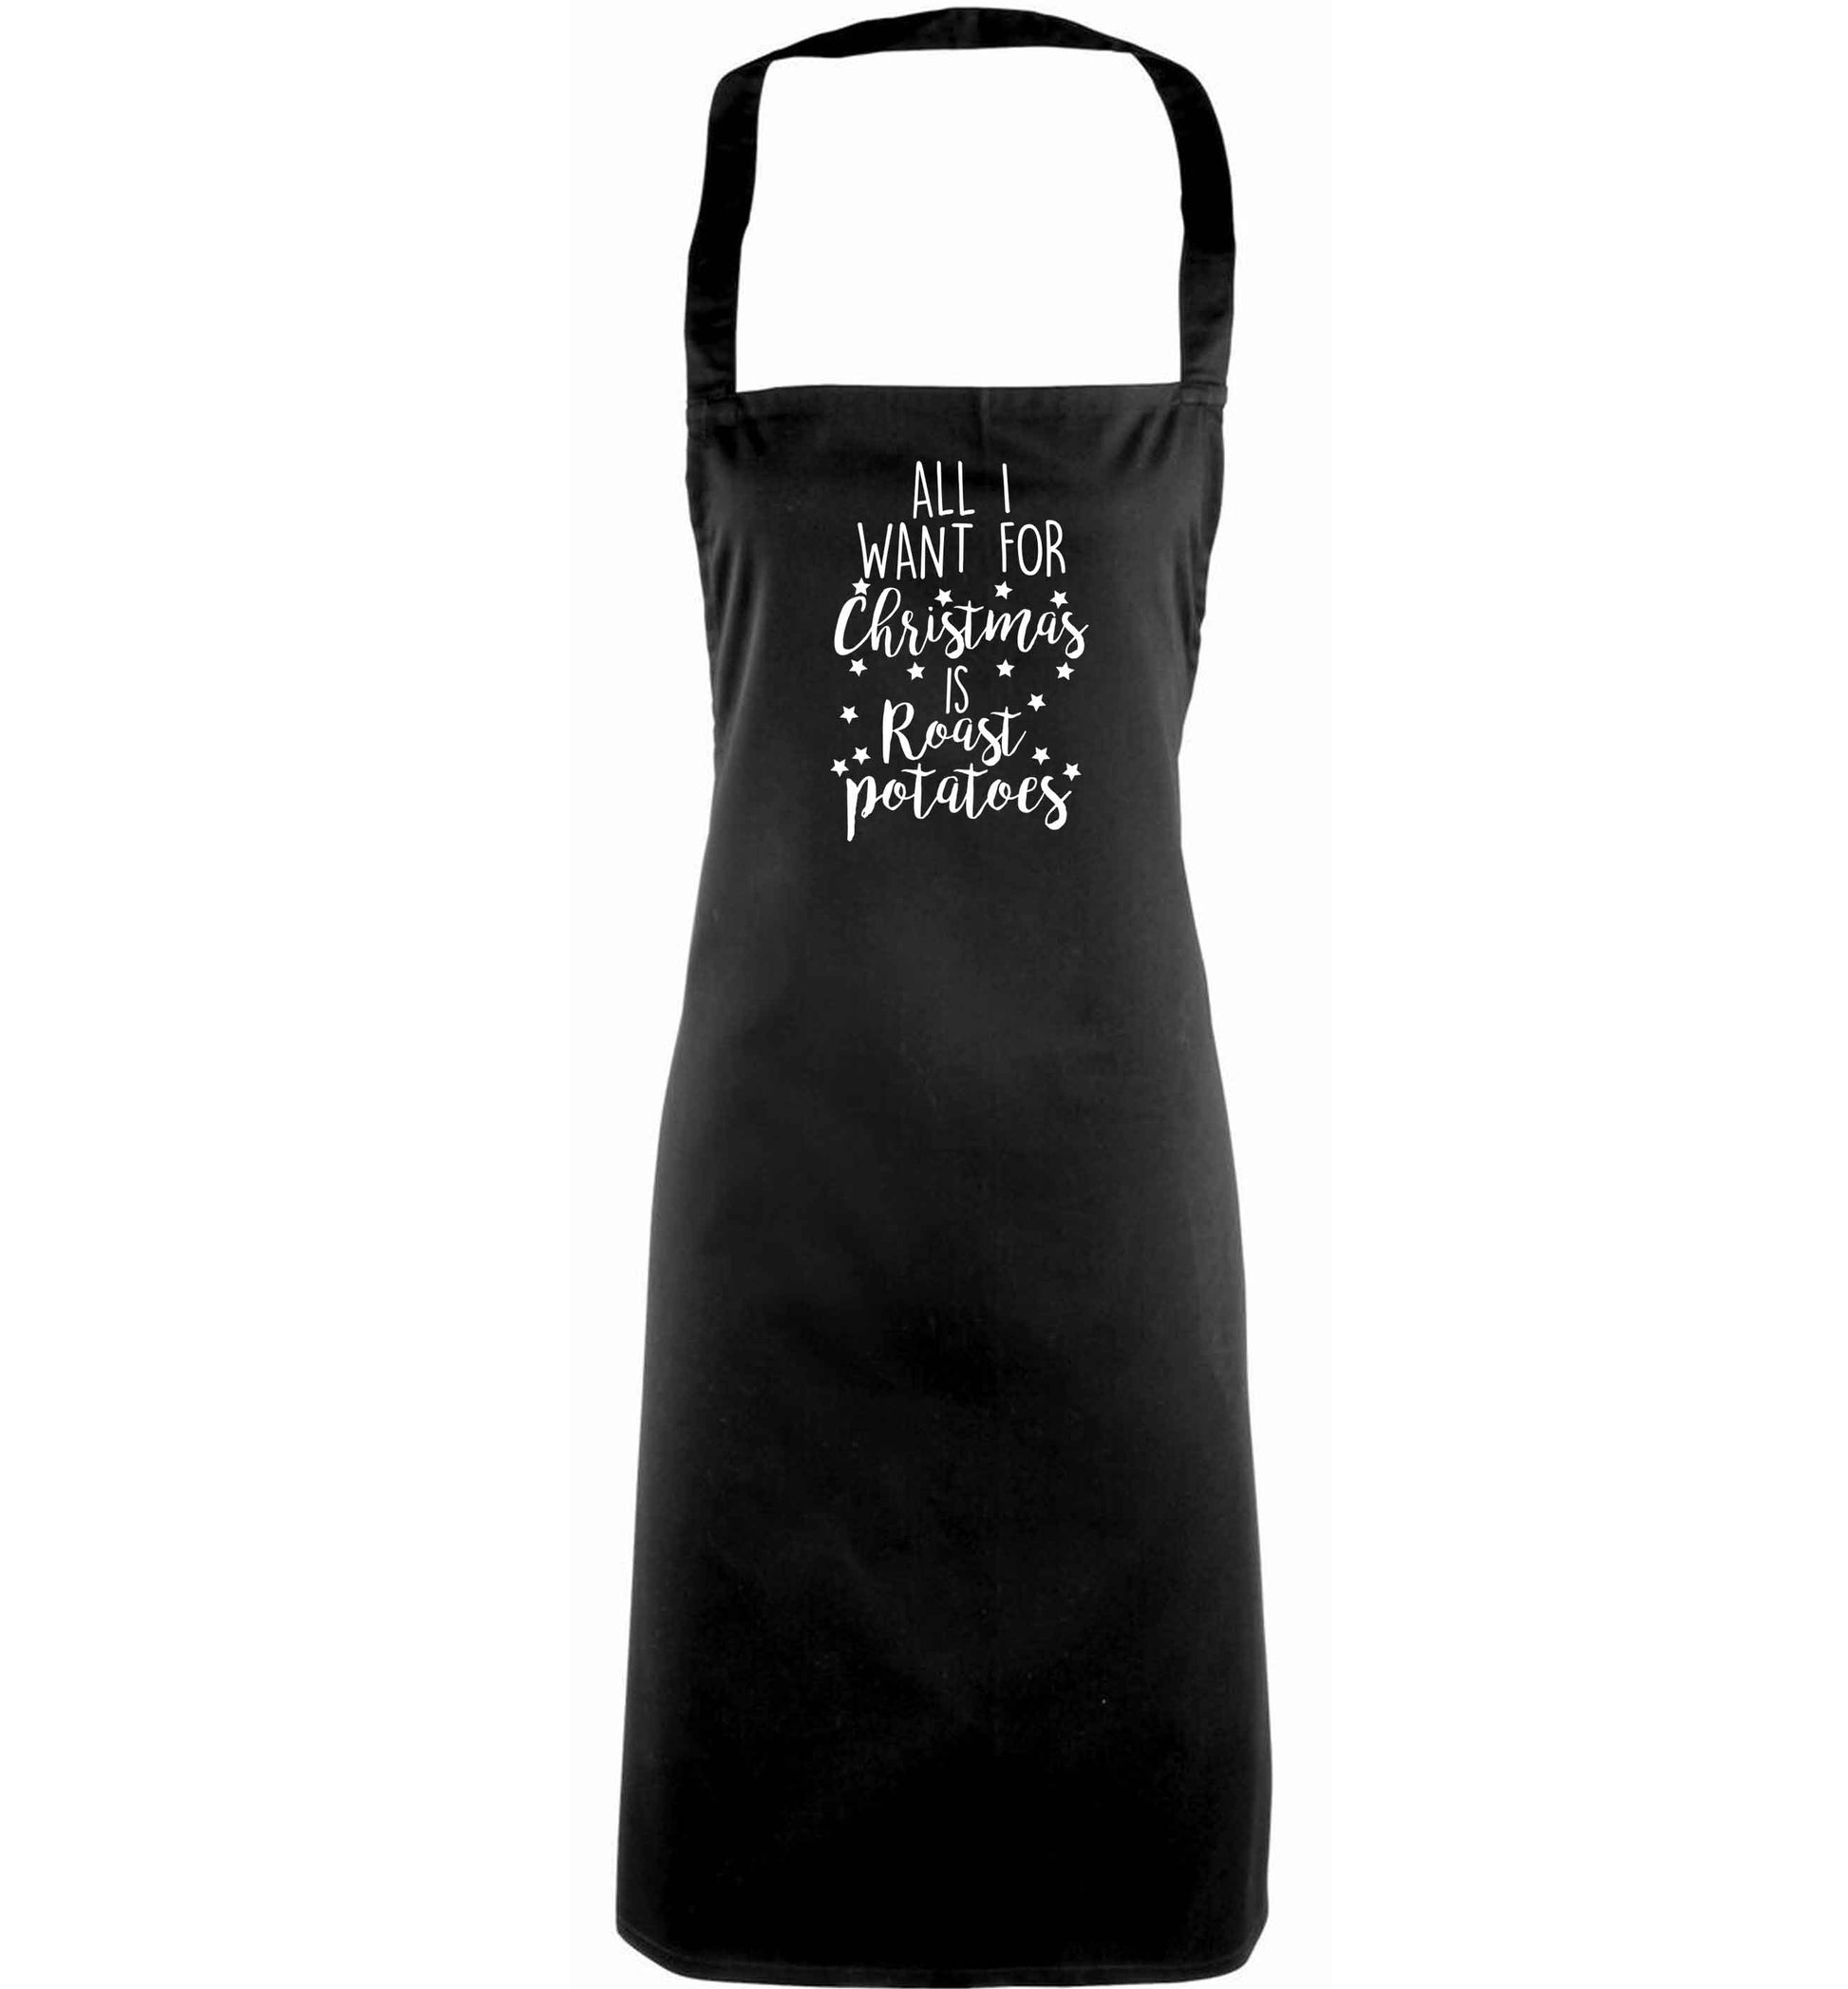 All I want for Christmas is roast potatoes adults black apron